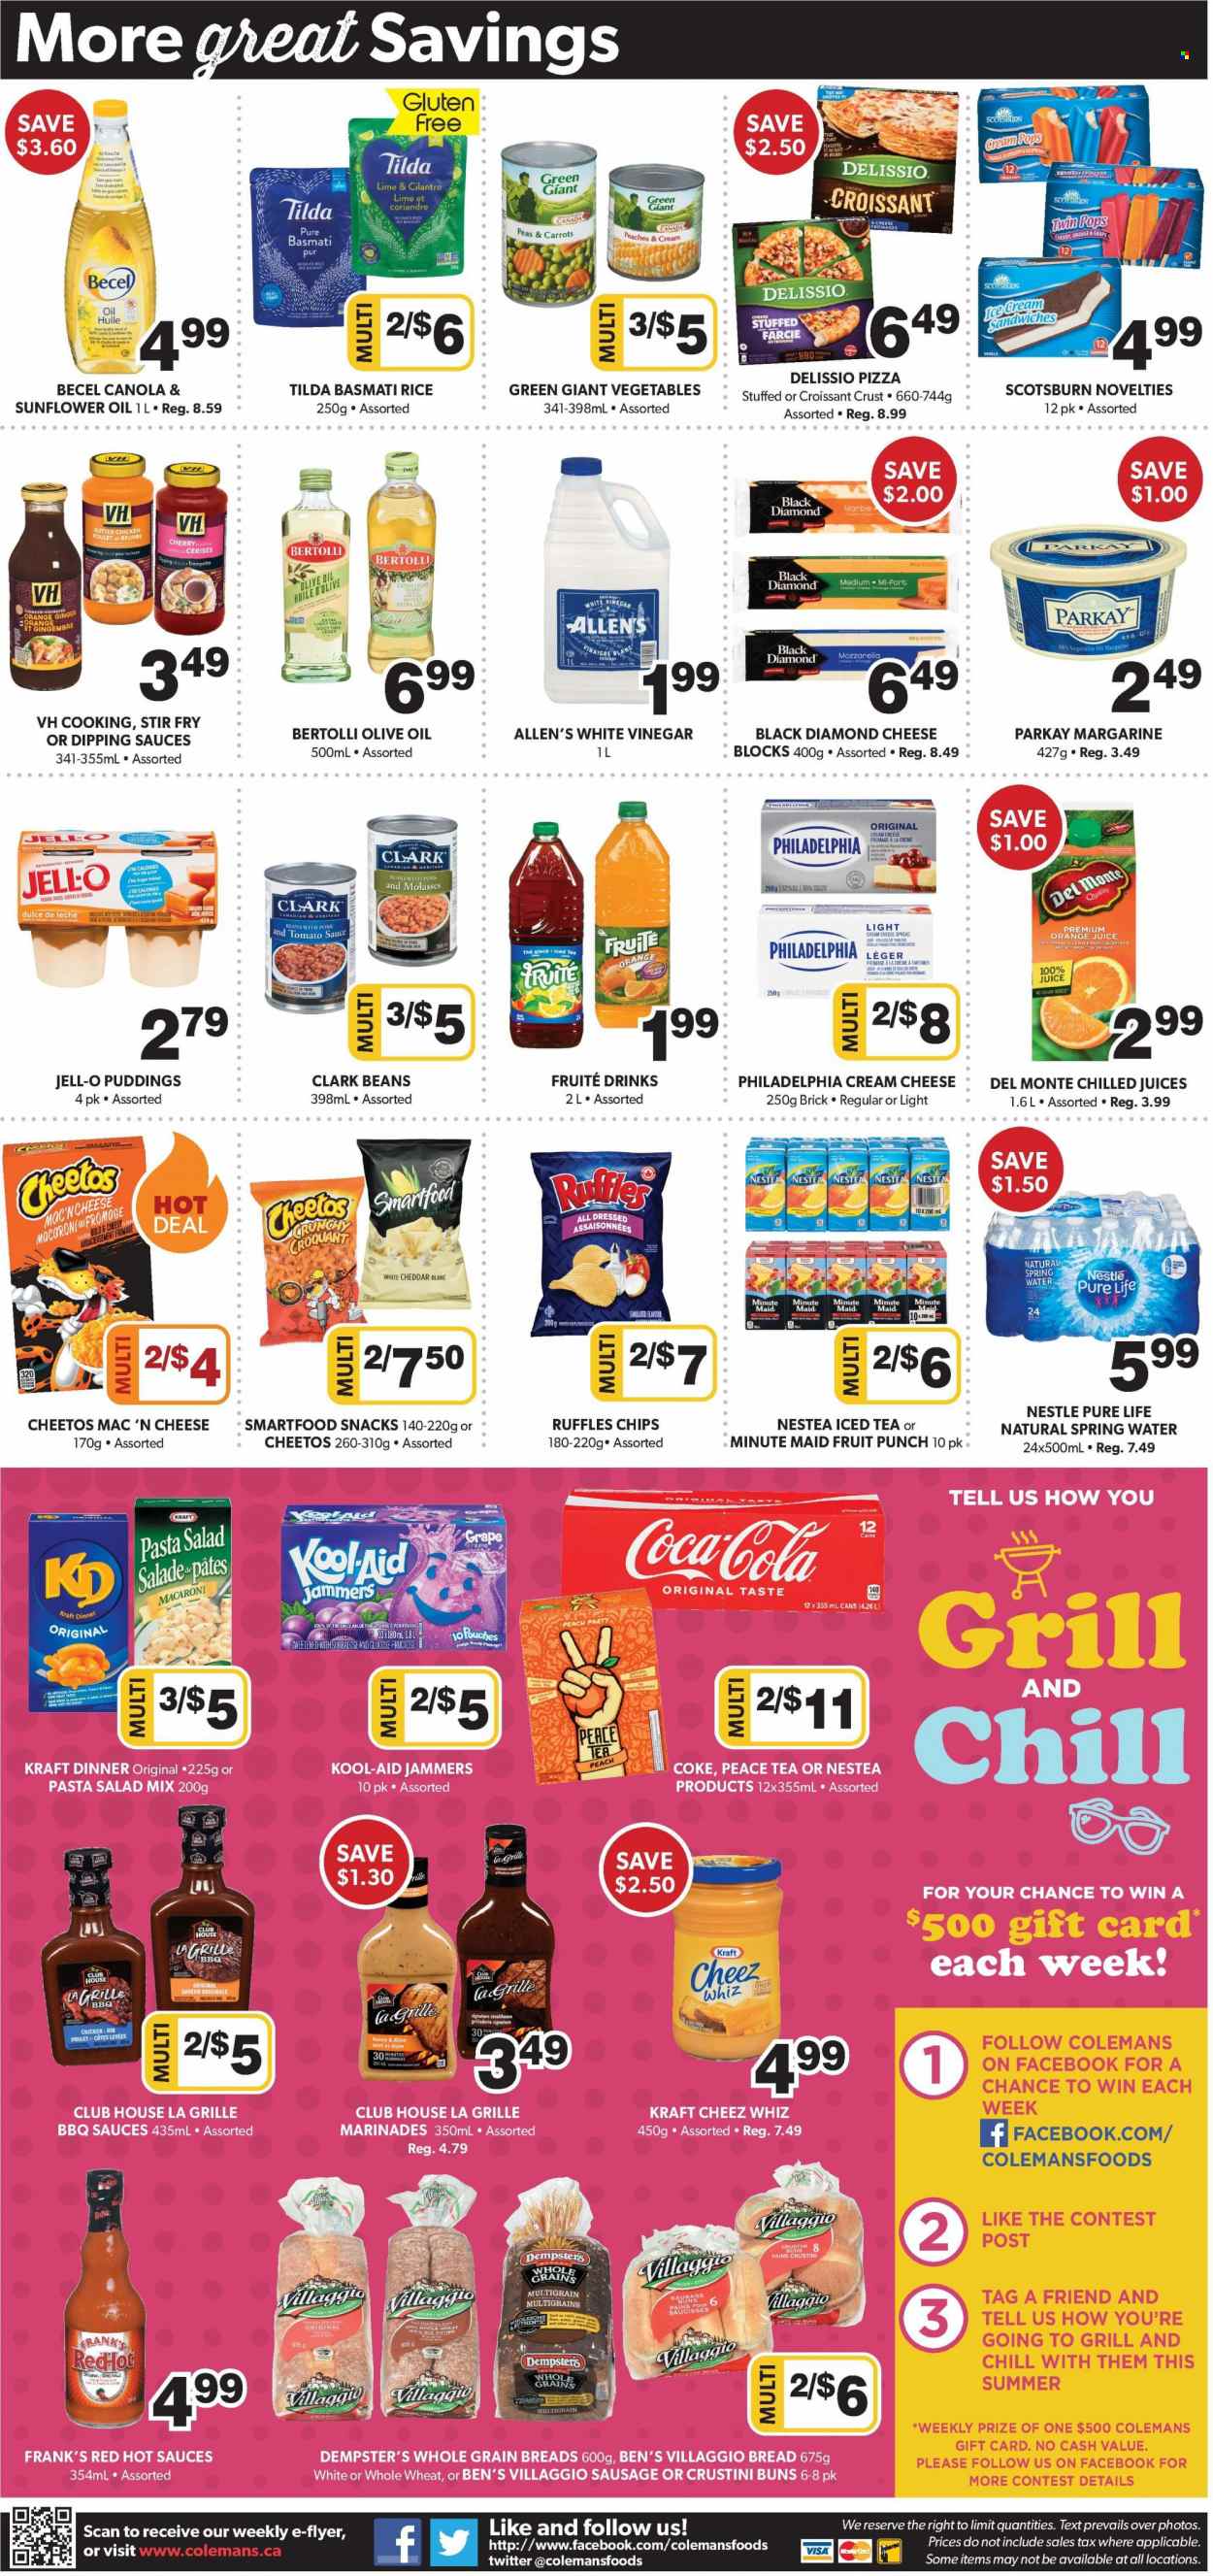 thumbnail - Colemans Flyer - June 30, 2022 - July 06, 2022 - Sales products - bread, croissant, buns, beans, carrots, ginger, cherries, peaches, pizza, macaroni, Kraft®, Bertolli, sausage, cheese spread, pasta salad, pudding, butter, margarine, ice cream, ice cream sandwich, snack, Cheetos, chips, Smartfood, Ruffles, Jell-O, tomato sauce, basmati rice, rice, cilantro, sunflower oil, vegetable oil, olive oil, oil, molasses, honey, Coca-Cola, orange juice, juice, ice tea, fruit punch, spring water, Mum, kool aid, Nestlé, Philadelphia. Page 6.